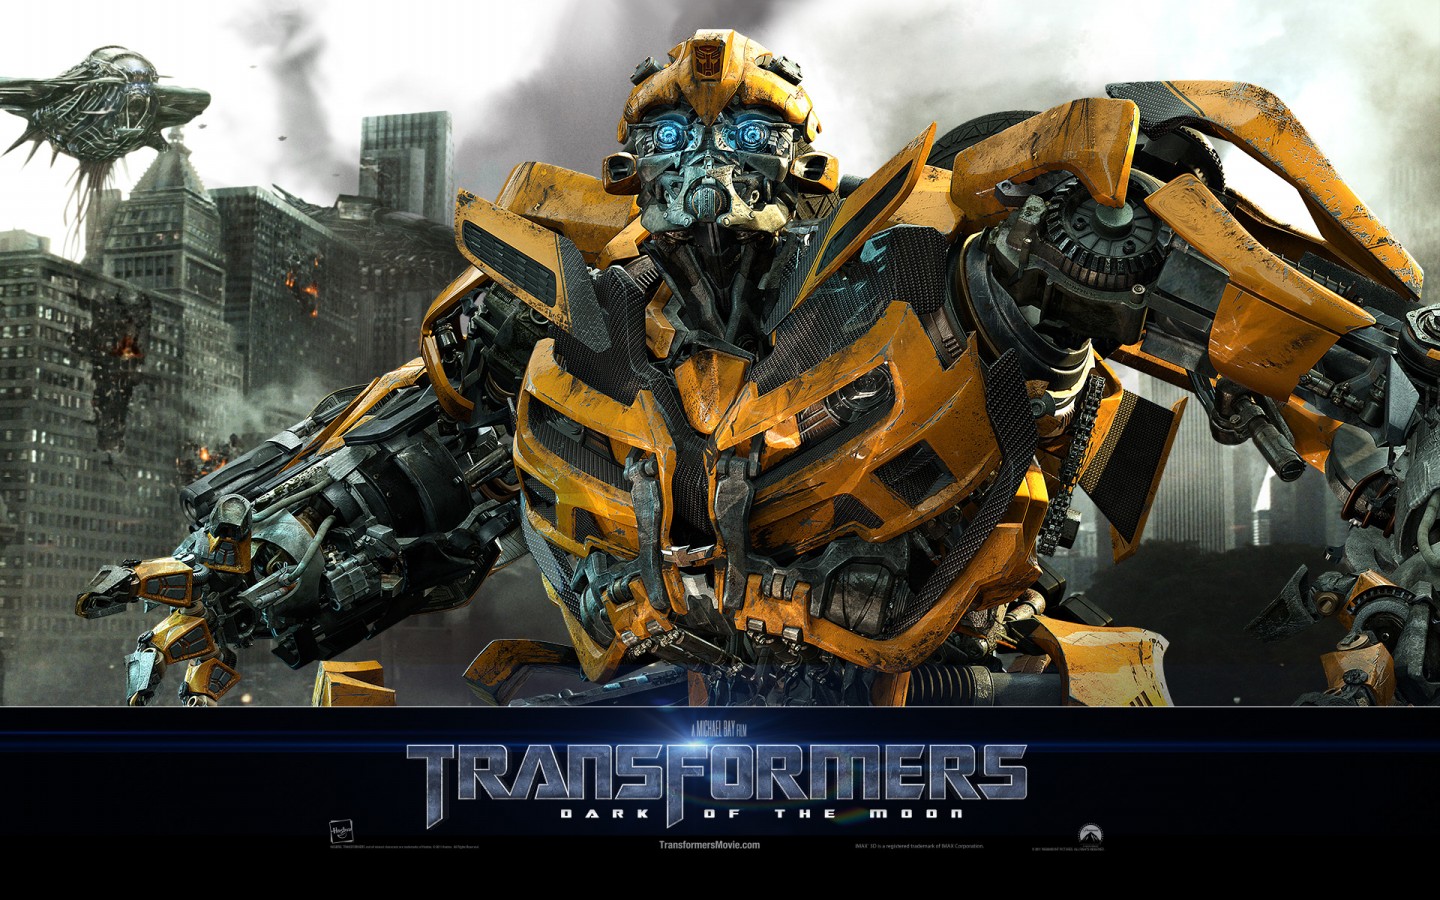 Bumblebee Transformers 3 Pictures HD Wallpaper of Movie 1440x900